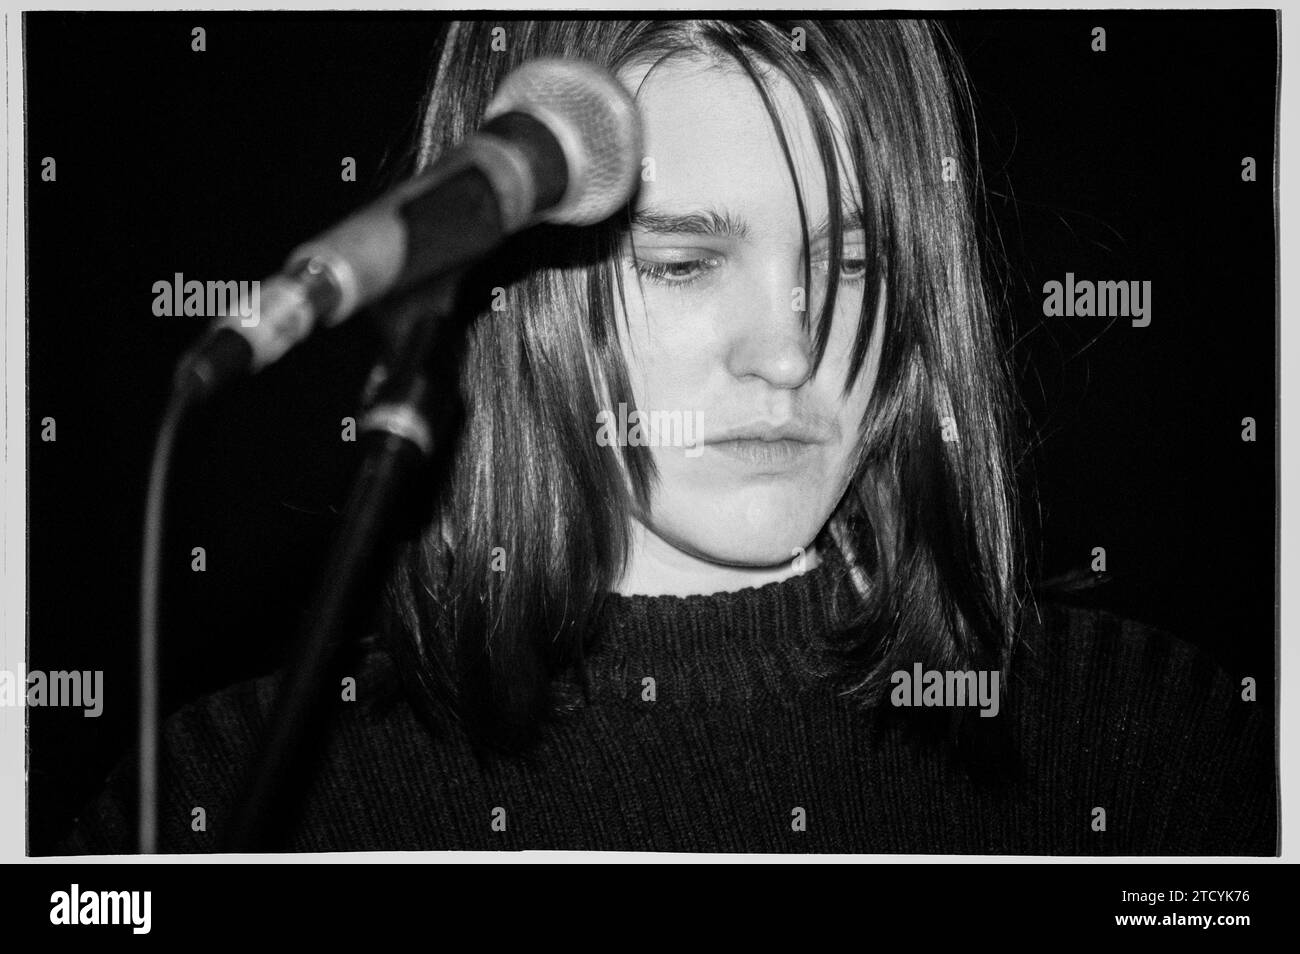 TRISH KEENAN, BROADCAST, 1997: A very young Trish Keenan (1968-2011) the singer of the British Electronic band Broadcast playing as support to Stereolab Cardiff University, Wales, UK on 21 November 1996. This picture was taken at the start of the band's critically acclaimed career touring with their first single and debut EP 'The Book Lovers'. Sadly Trish died unexpectedly of pneumonia following contracting swine flu in January 2011 while on tour in Australia. Photo: Rob Watkins Stock Photo